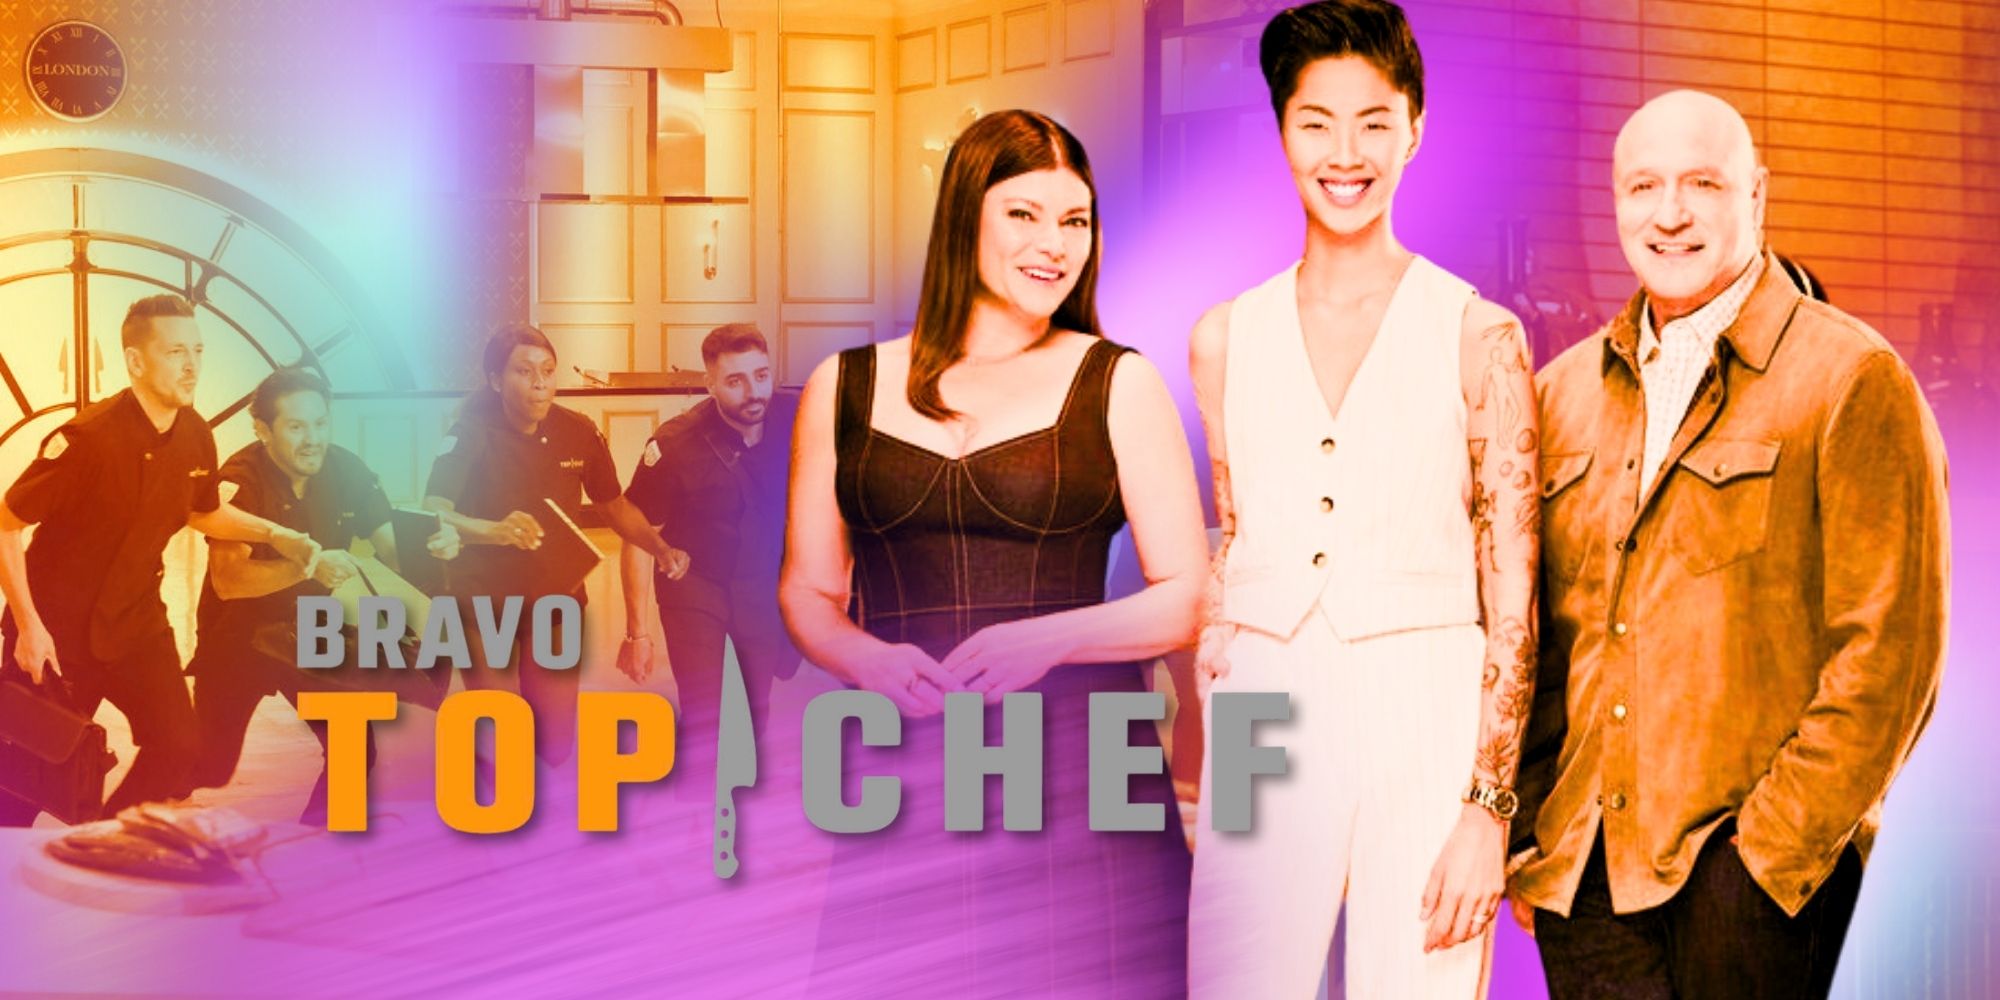 Top chef promo with judges